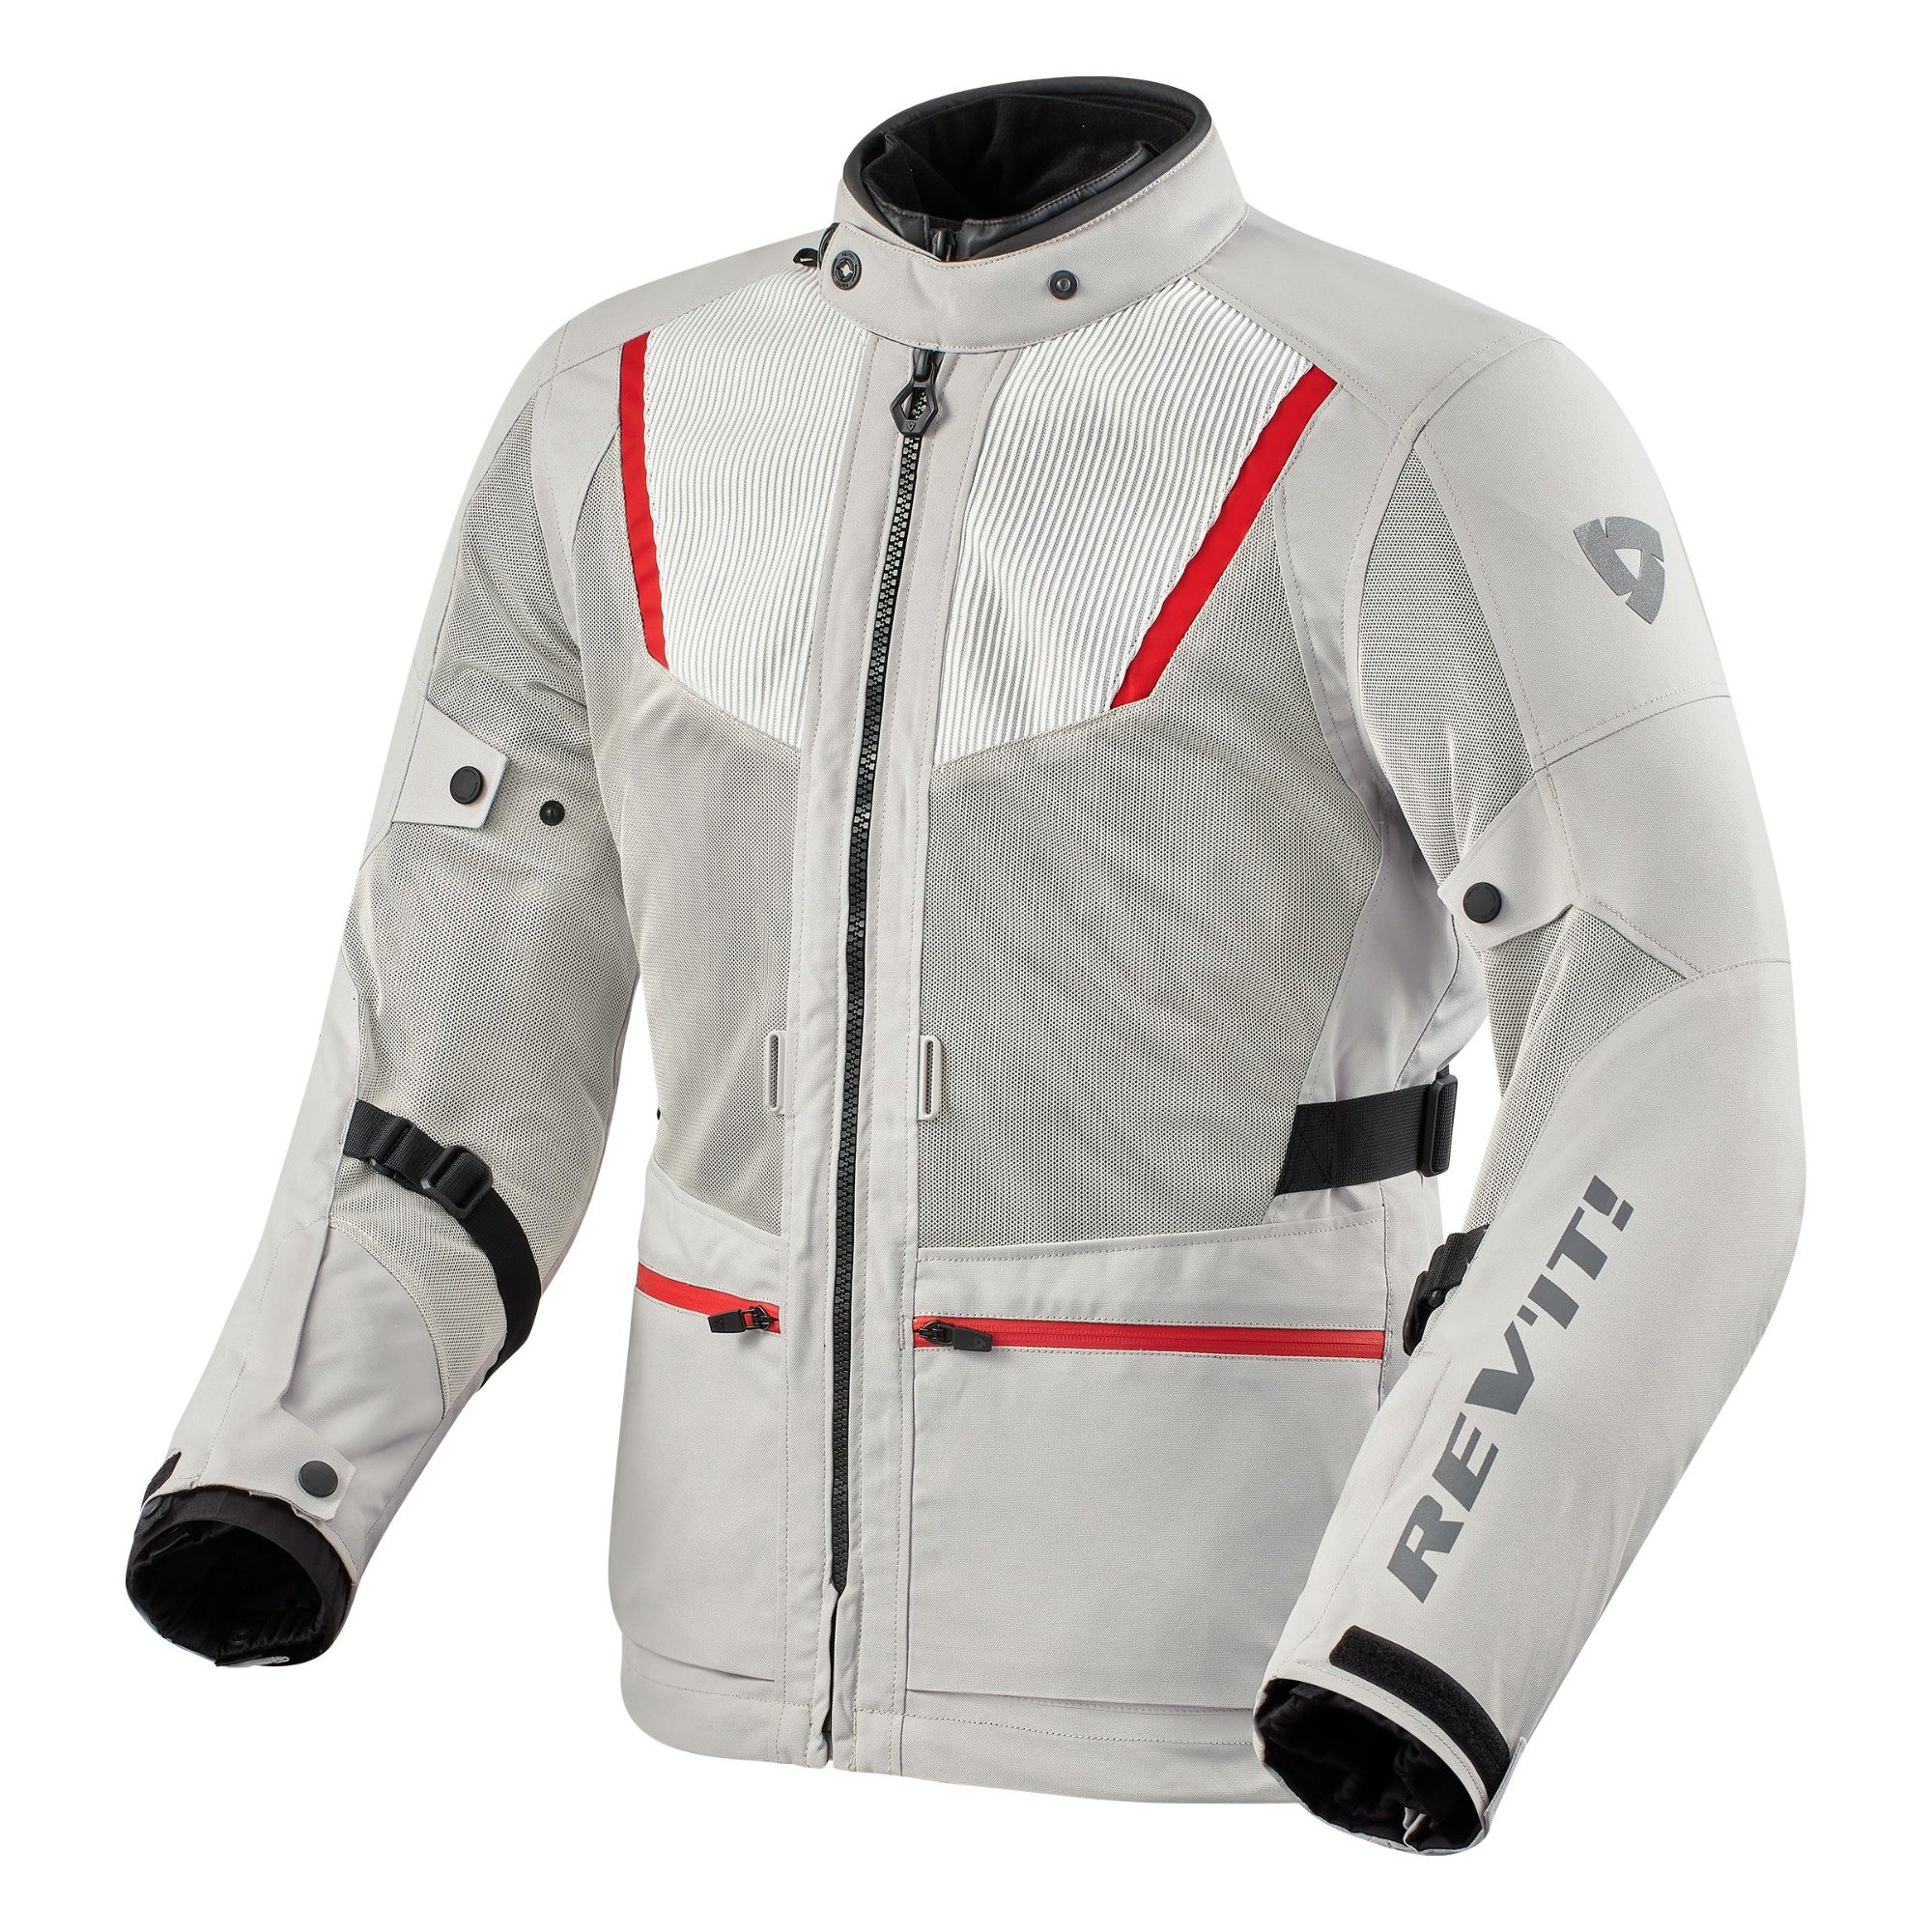 Image of REV'IT! Levante 2 H2O Jacket Silver Size S ID 8700001332606